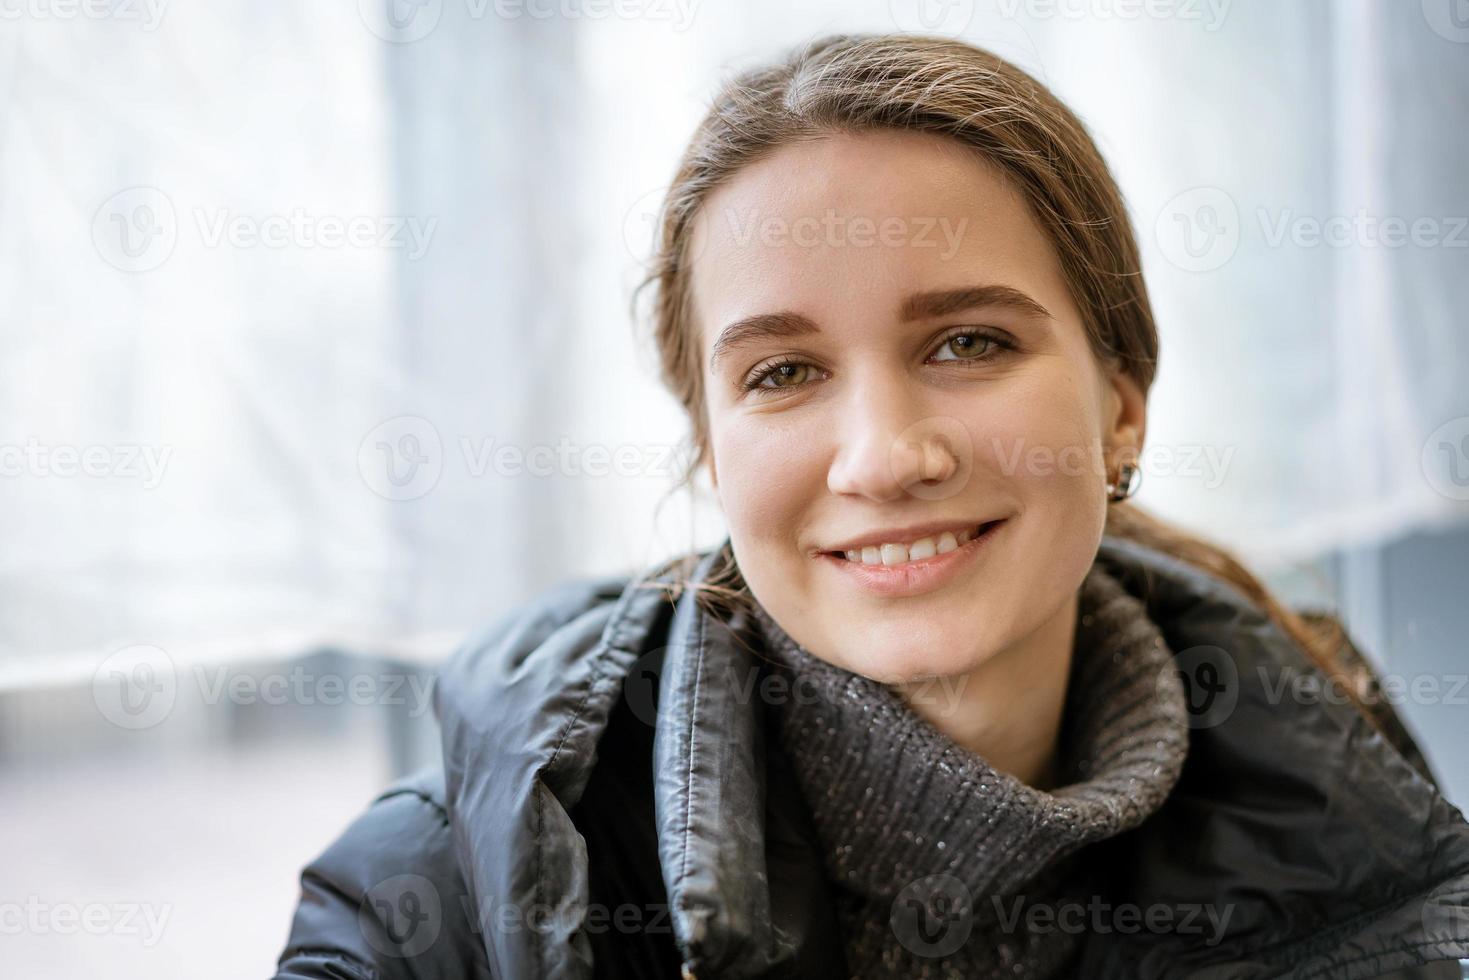 portrait of a cute girl smiling standing warmly dressed photo